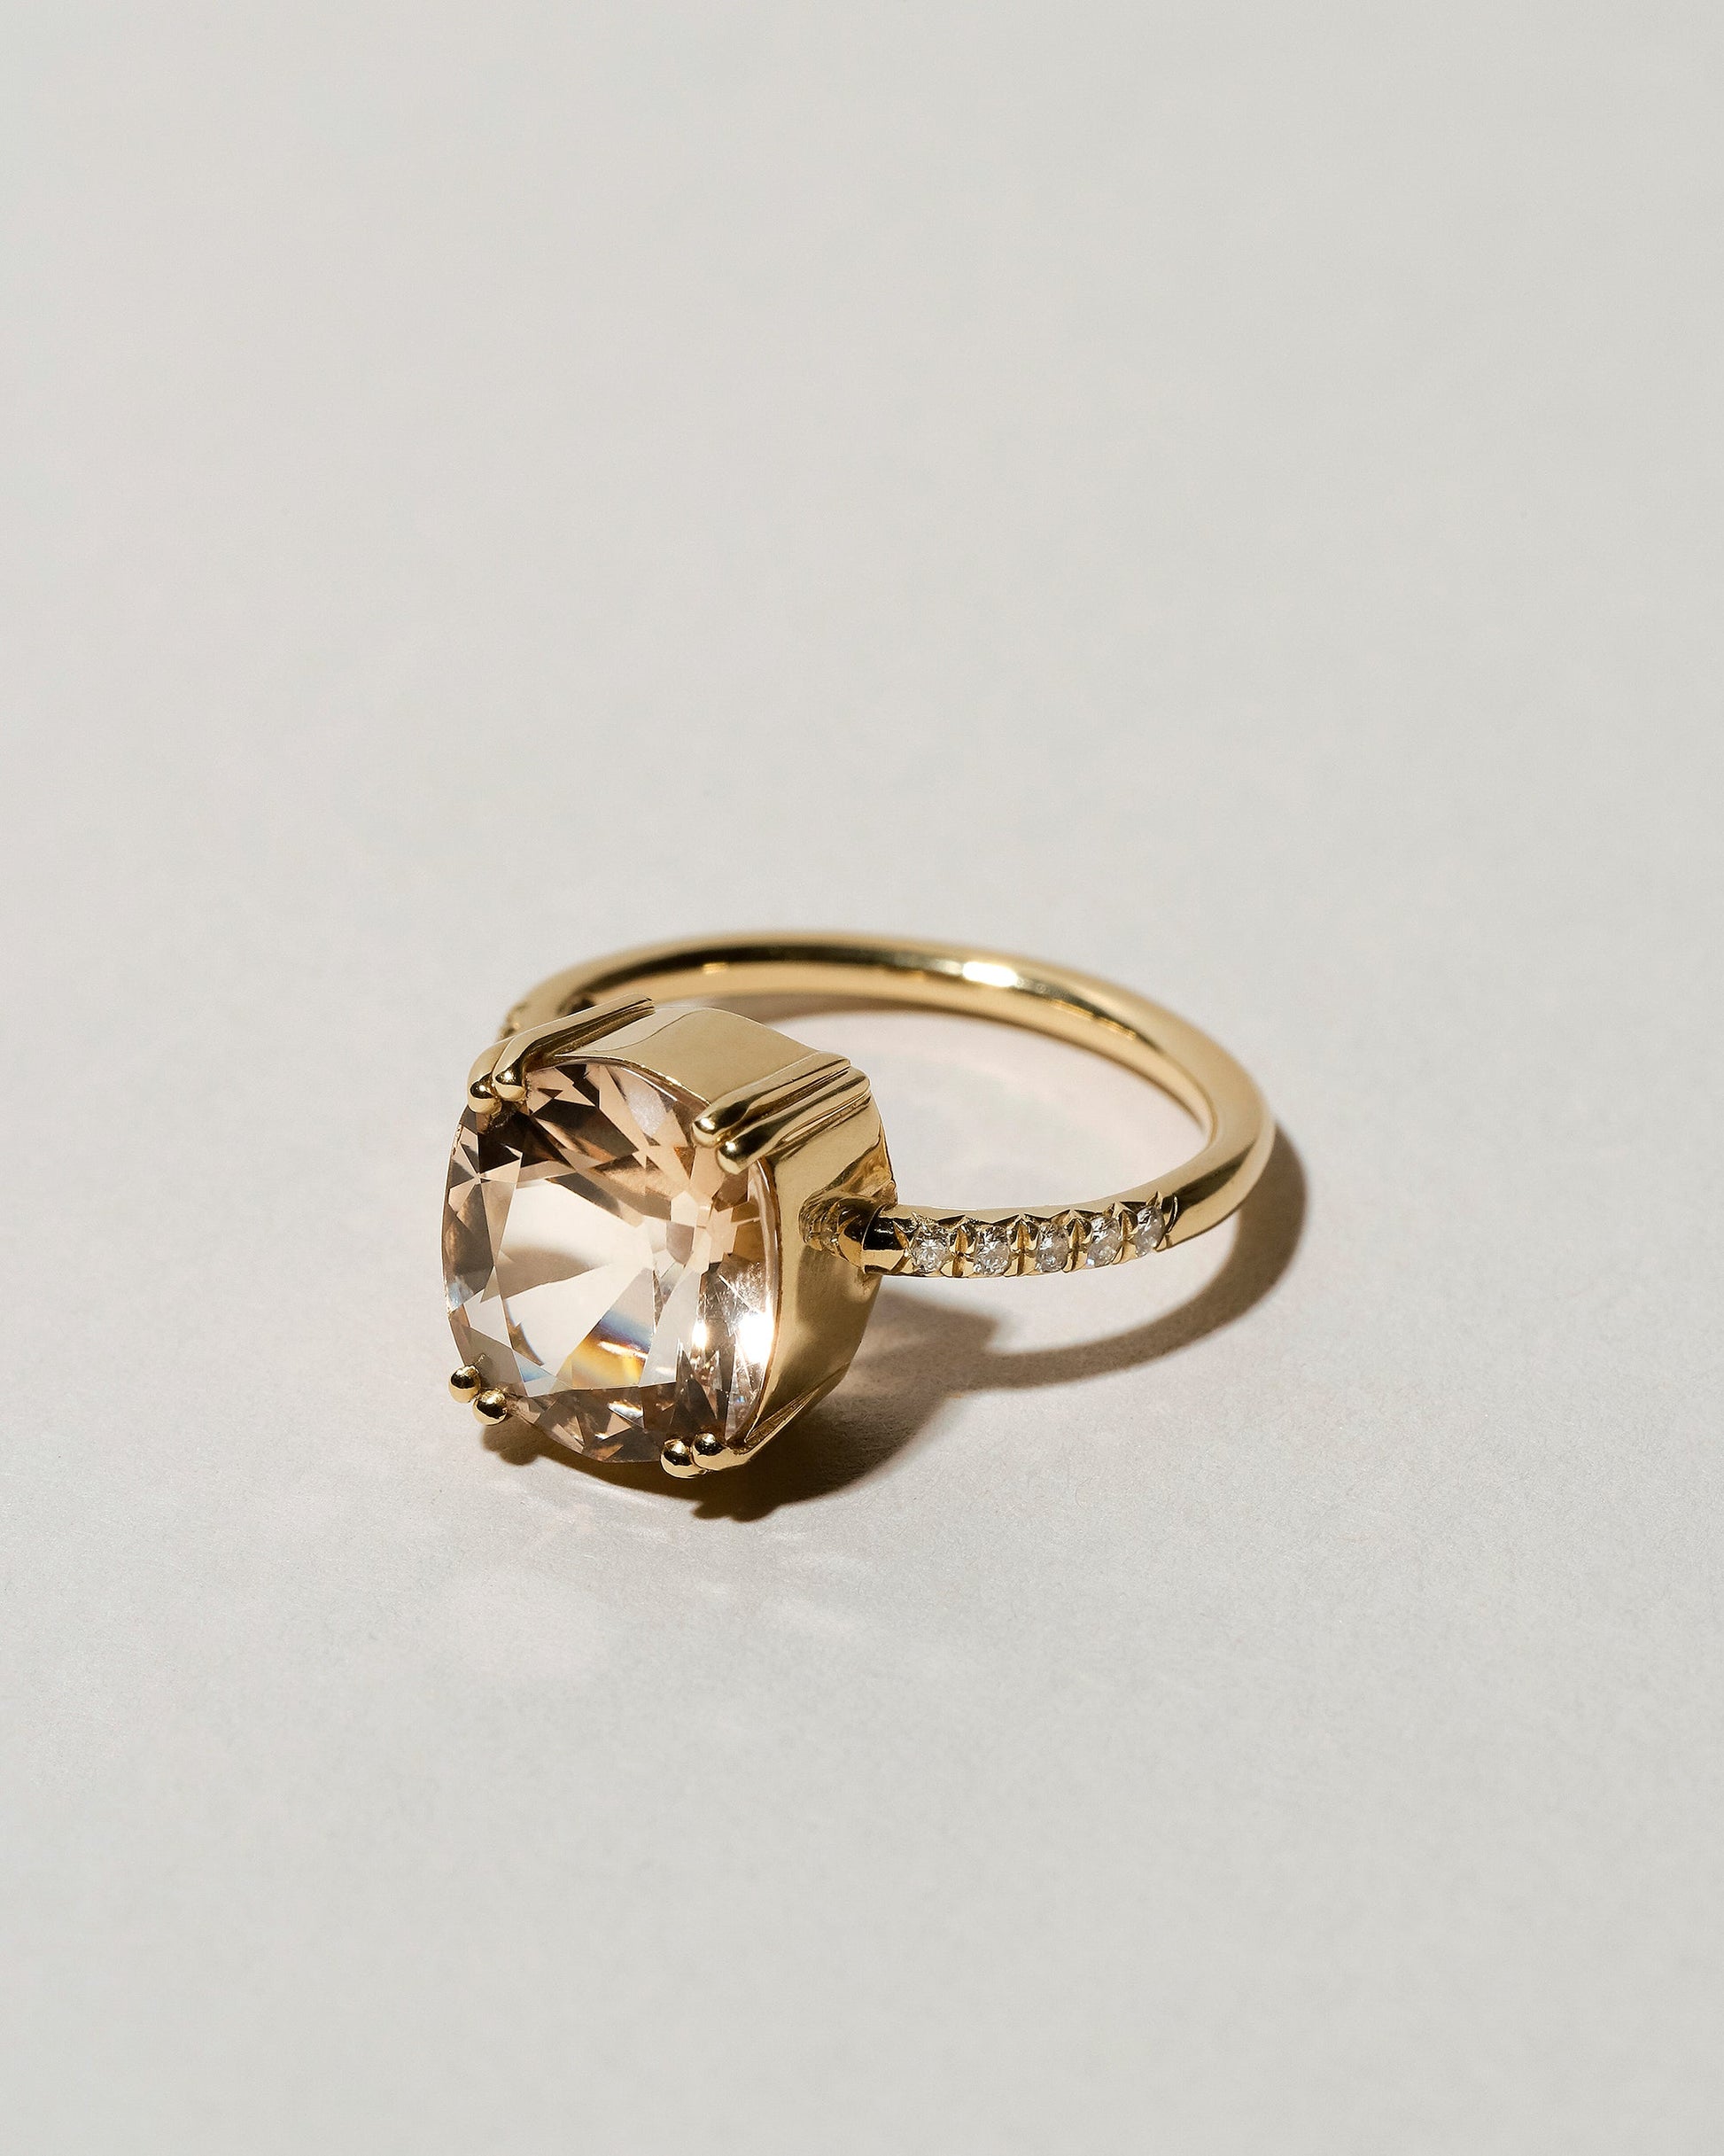  Morganite Solitaire Ring on light color background.